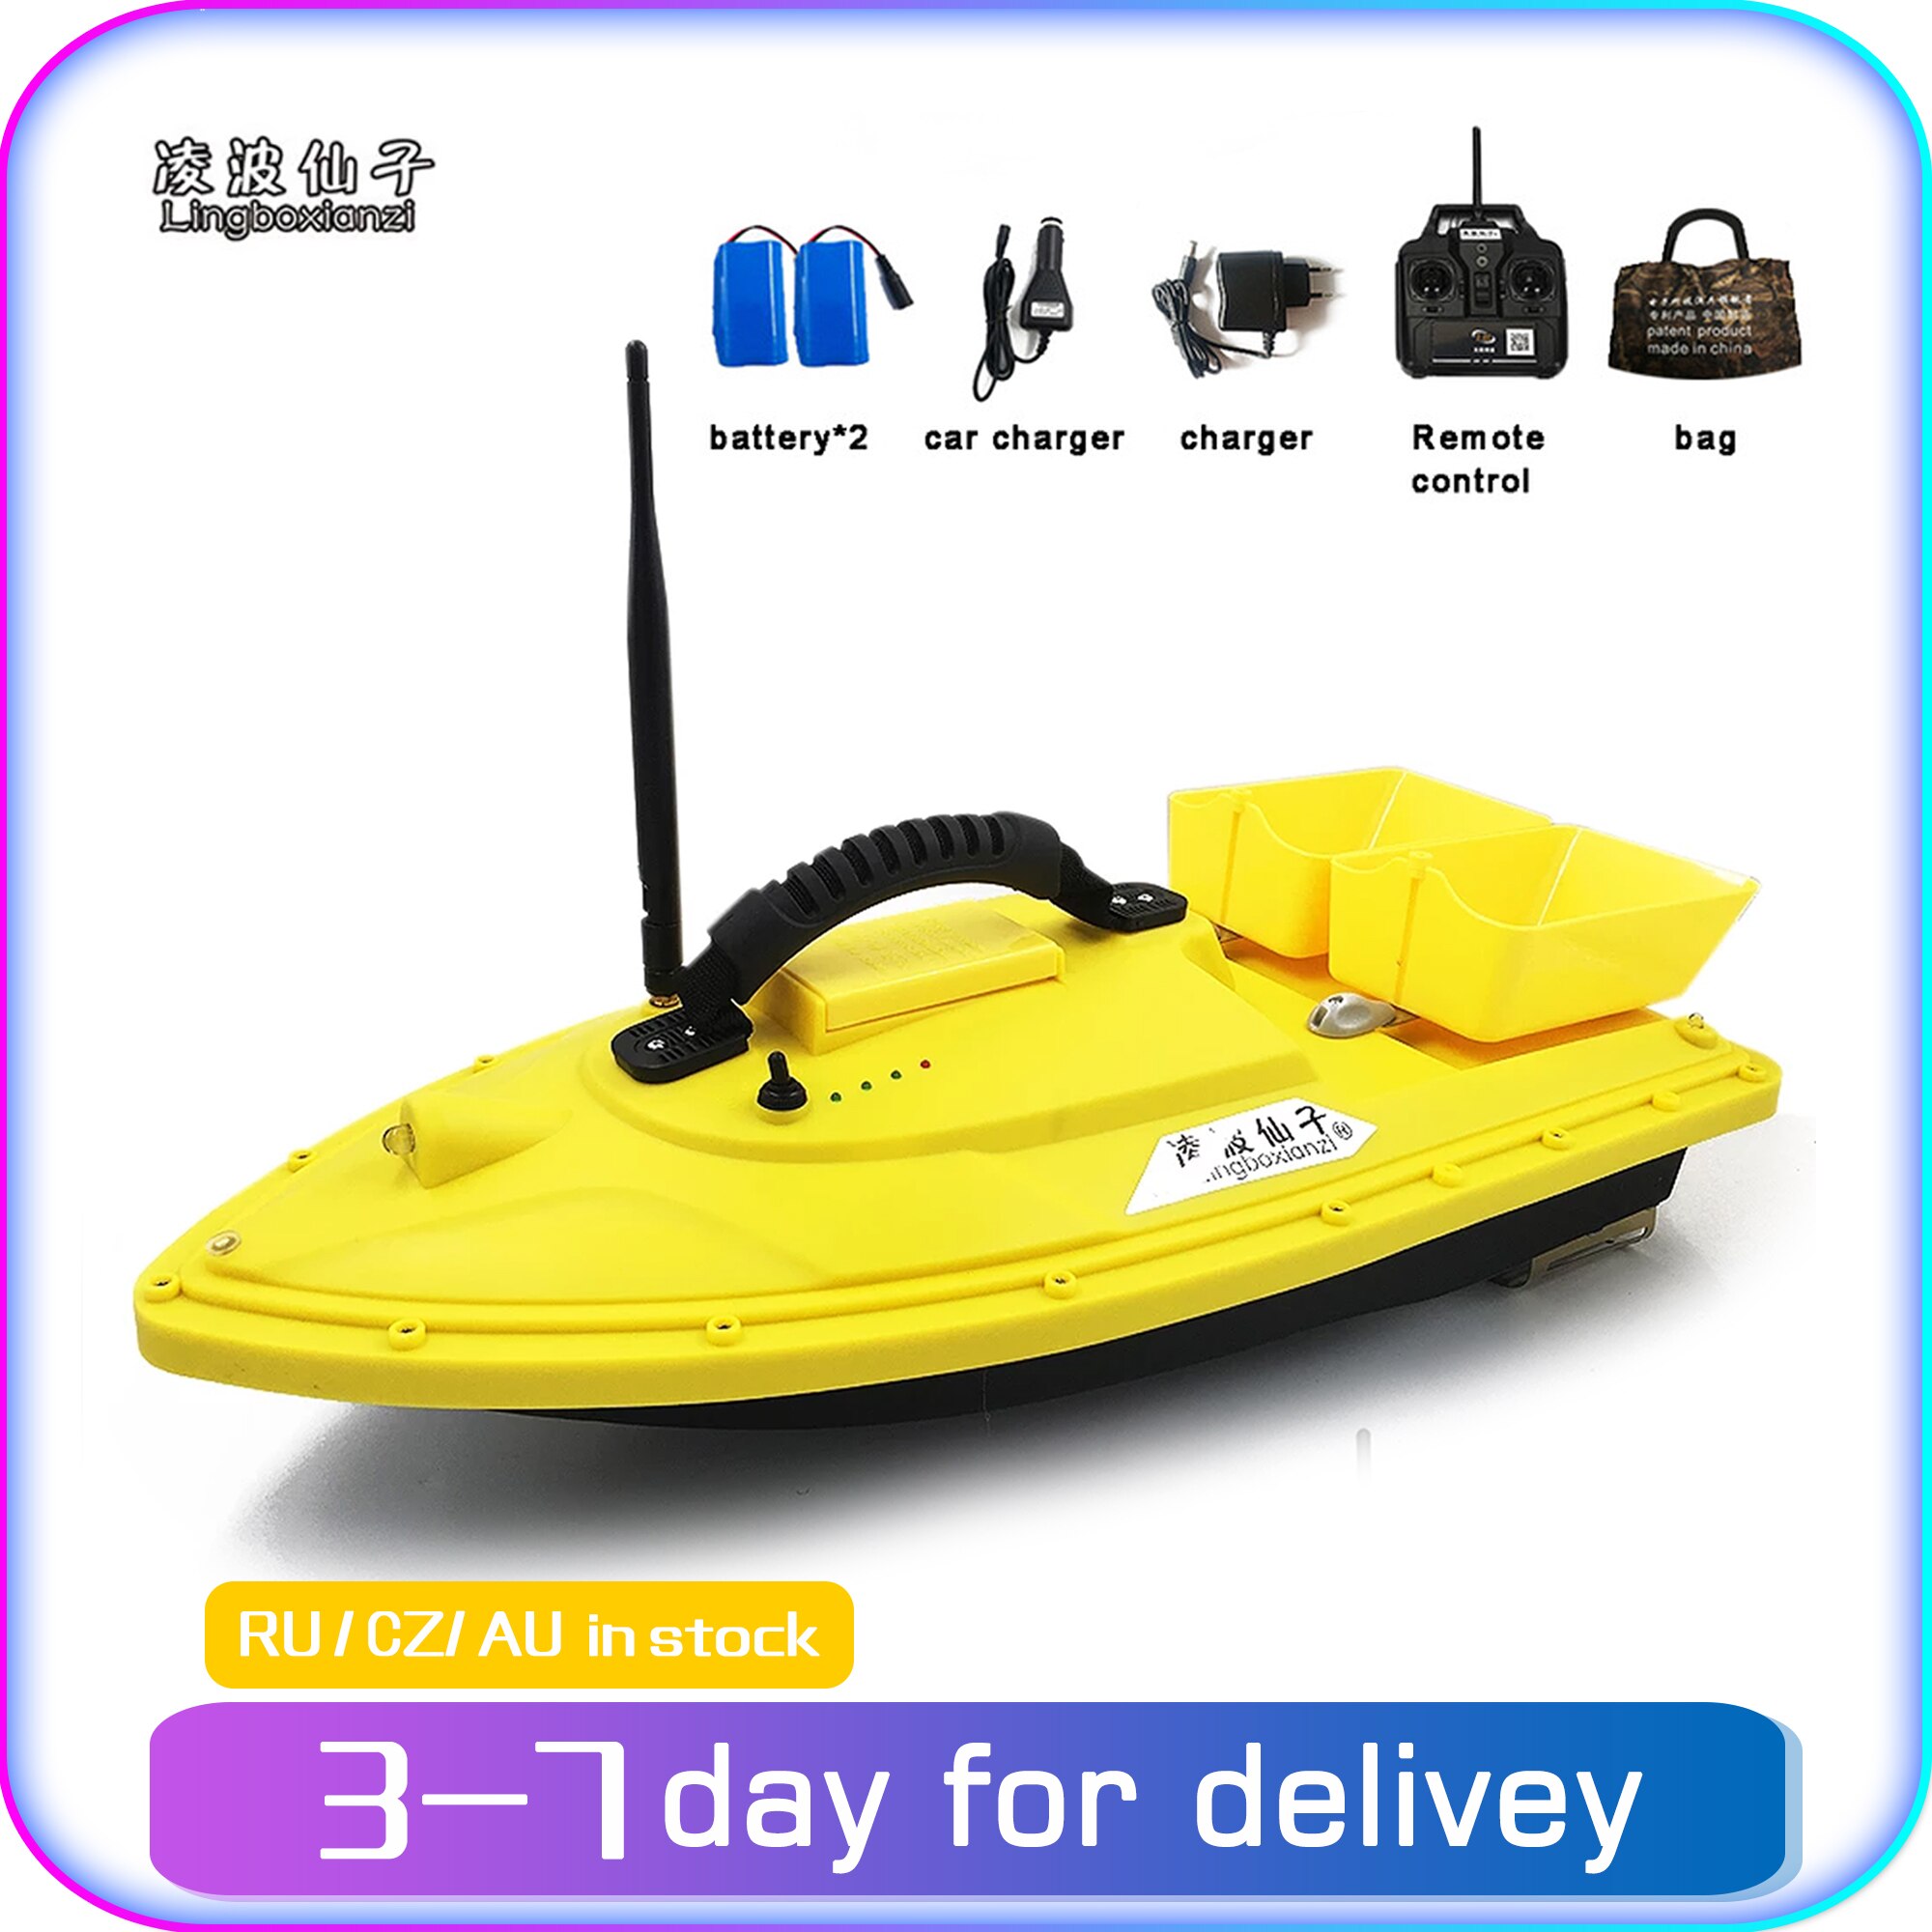 Smart Remote Control Bait Boat with Night Light, Fish Finder, 1.5kg Capacity, and 500m Wireless Range (Model T188)